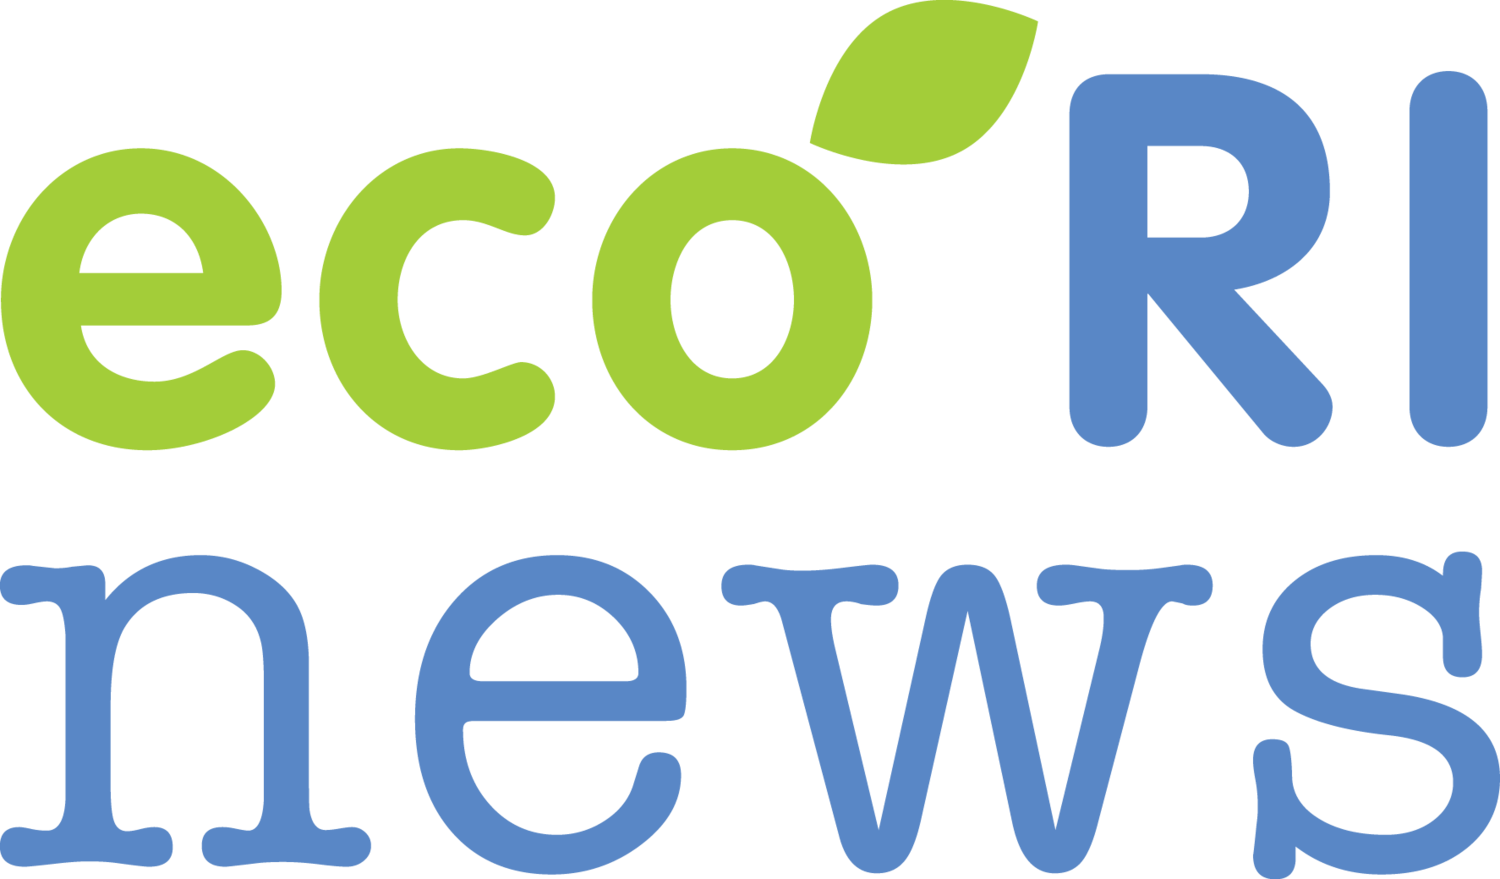 Logo of EcoRI News, Eco is in green, RI News is in blue